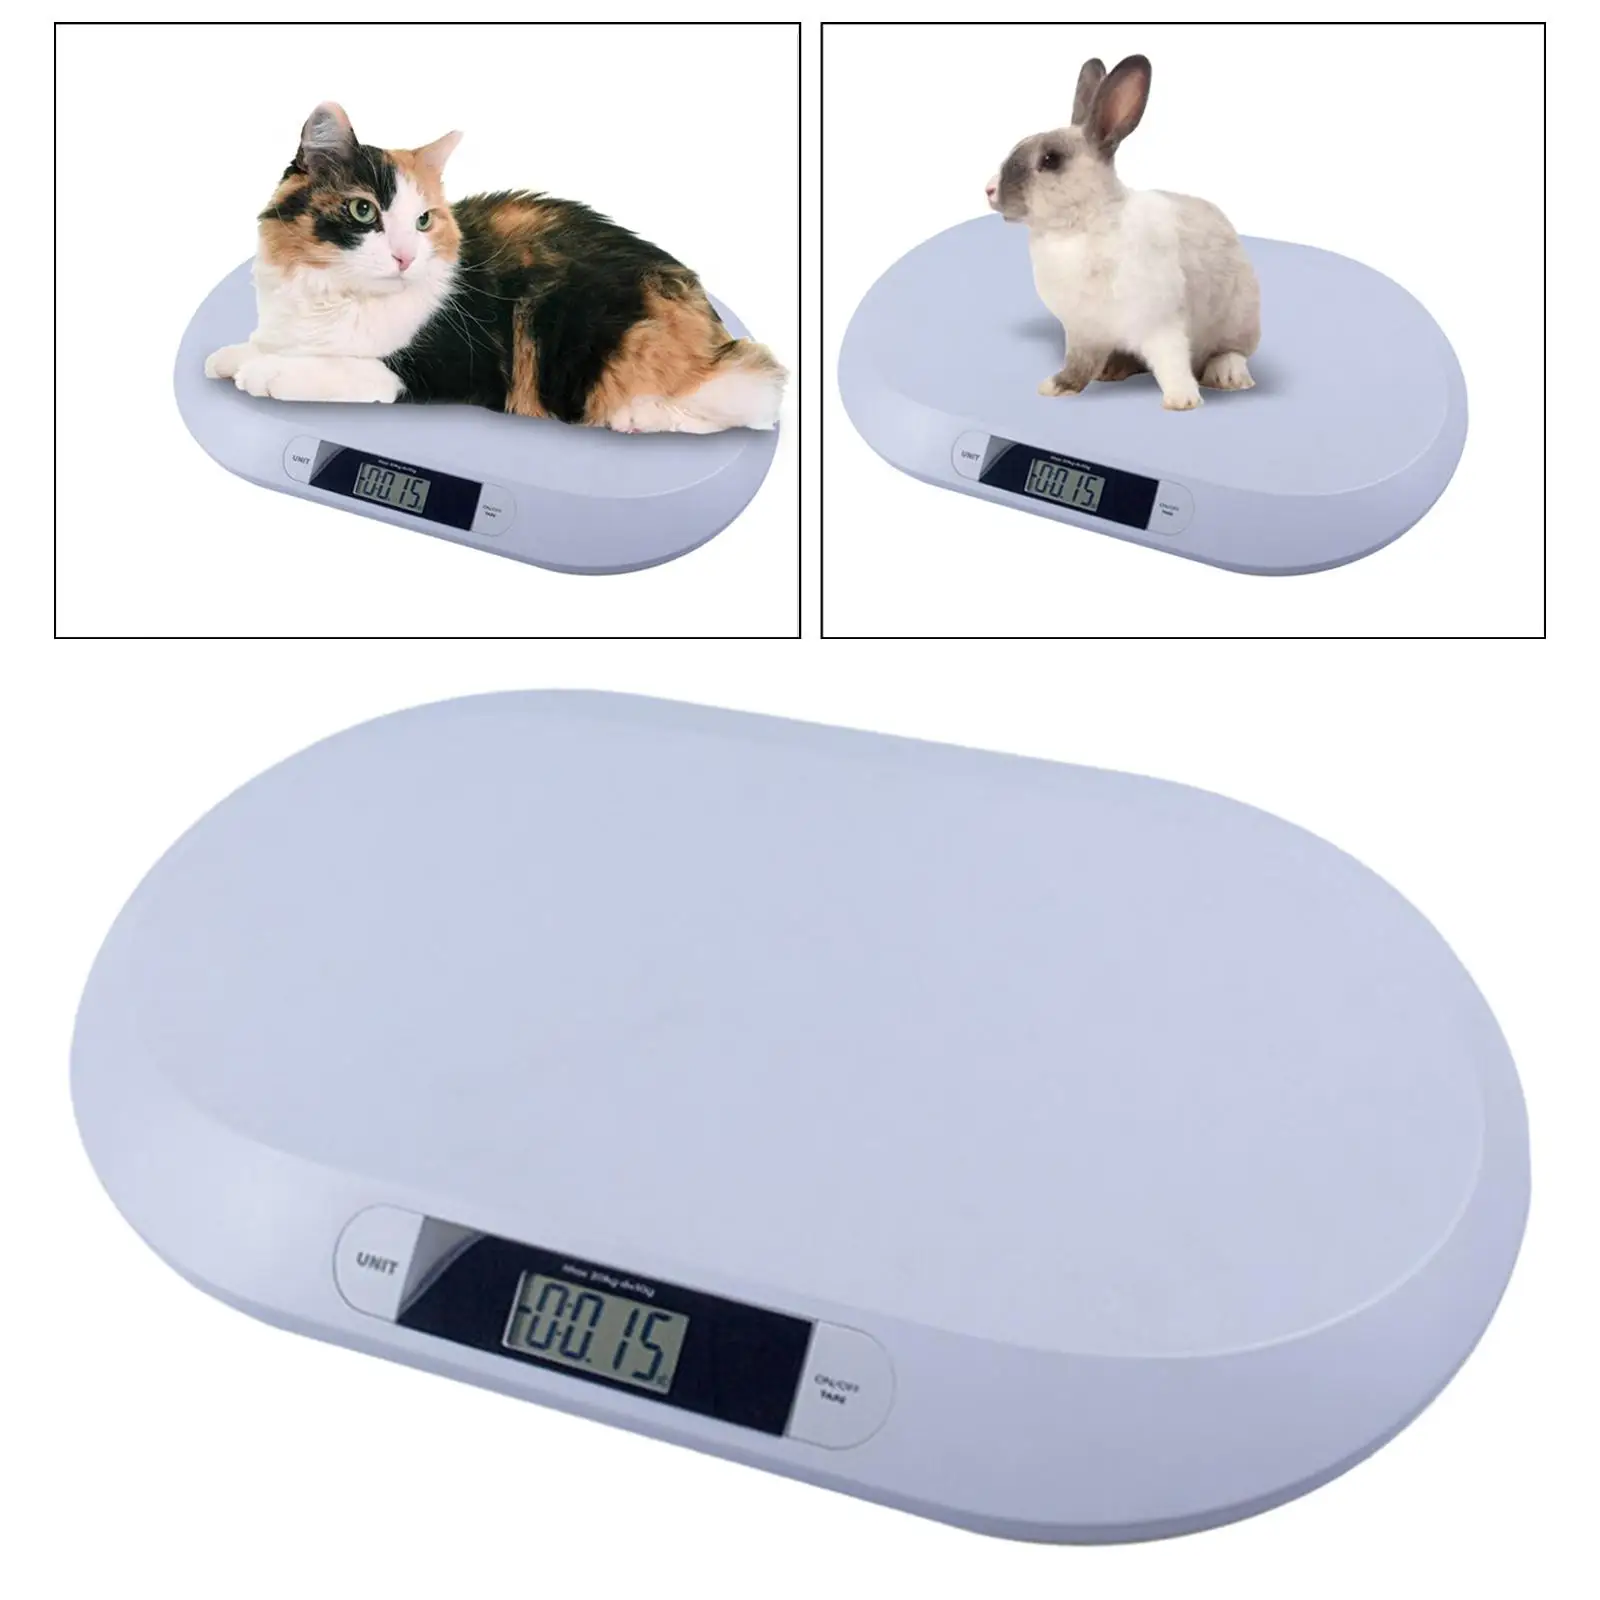 Digital Baby Scale 20kg Multifunction Accurate Comfort LCD Display Weigh Meter for Dogs Animals Toddlers Newborns Infants